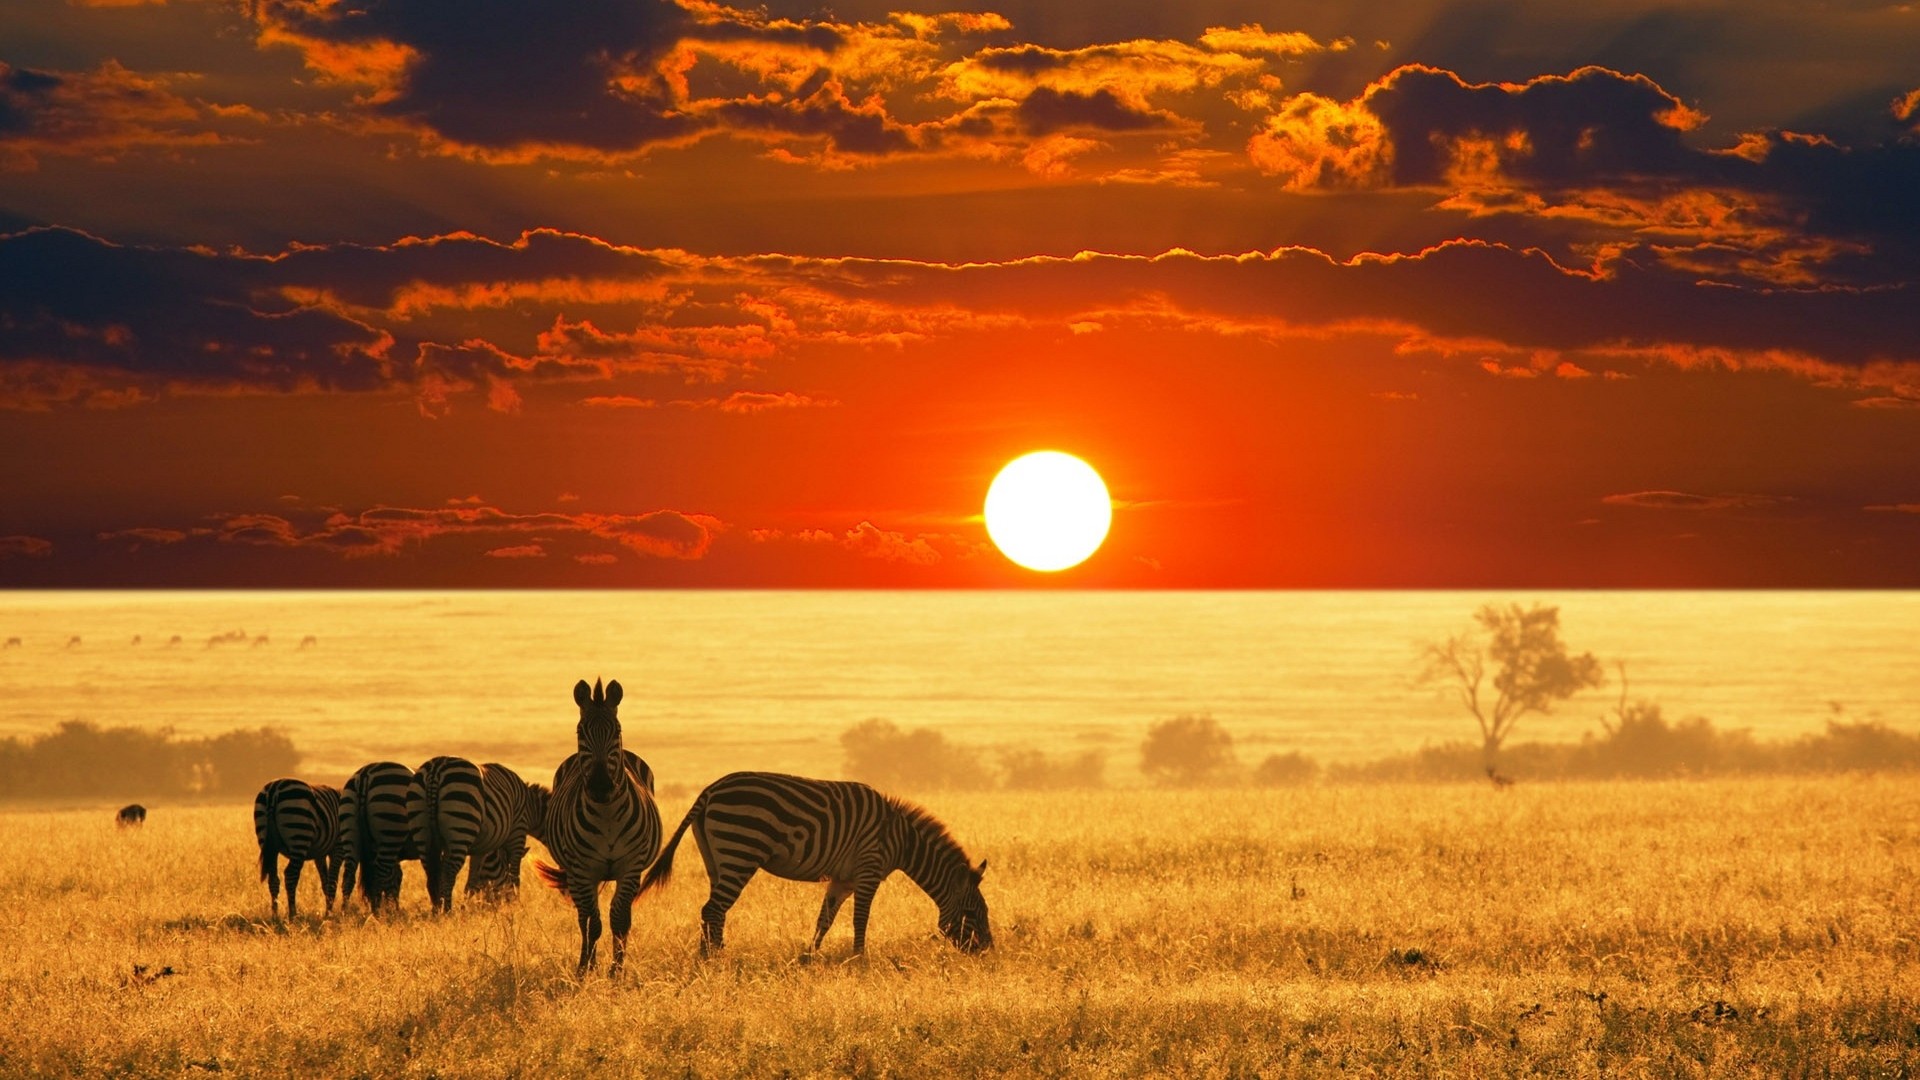 Adventure Tourism In Safaris - An Ultimate Guide For Thrill-Seeking Travelers